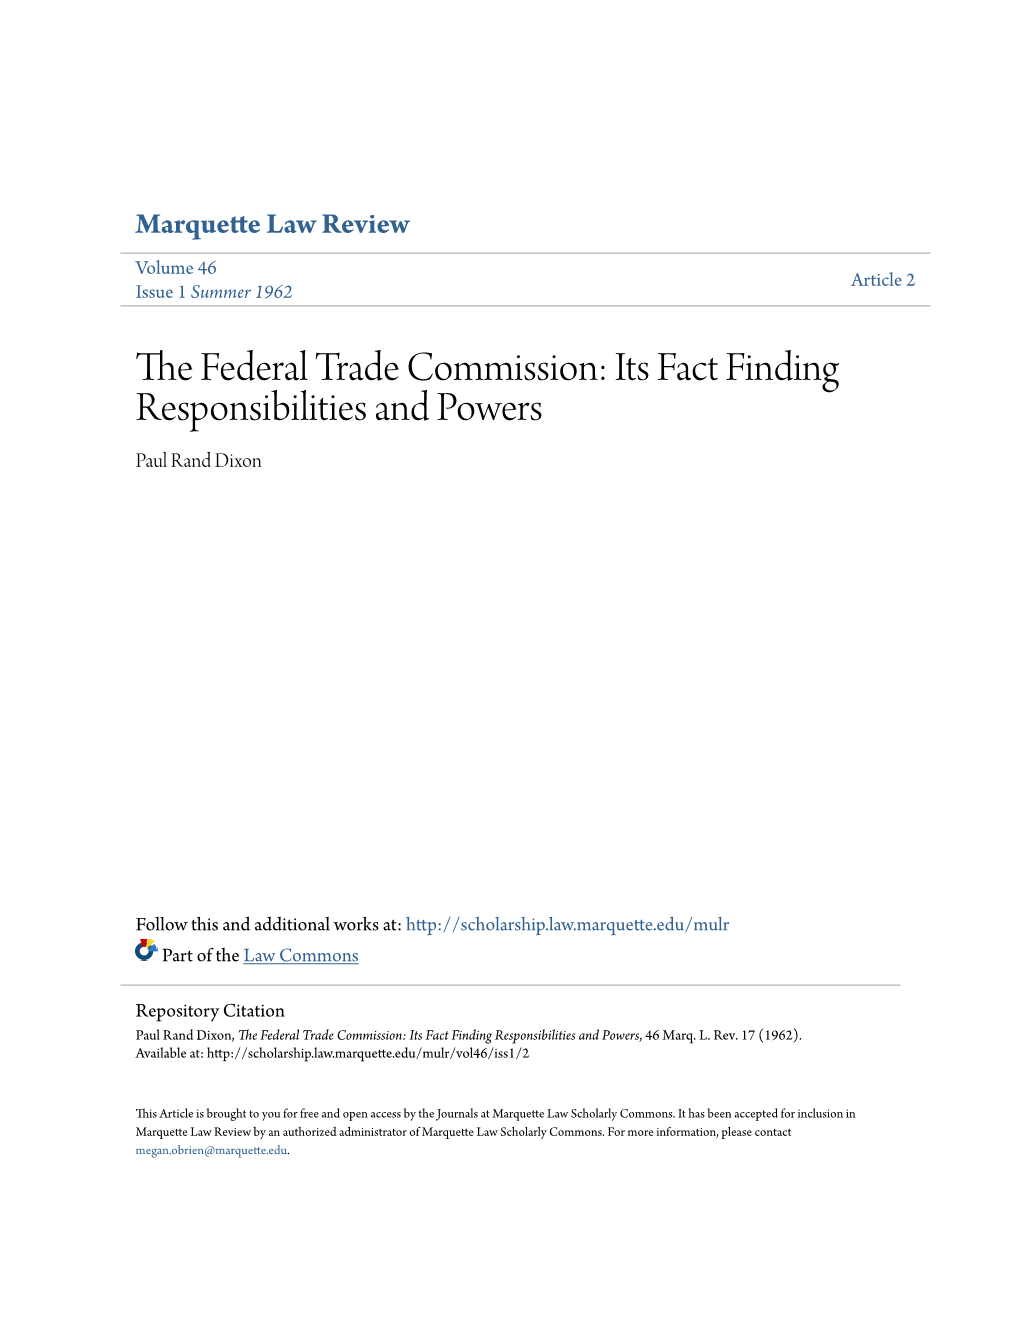 The Federal Trade Commission: Its Fact Finding Responsibilities and Powers, 46 Marq